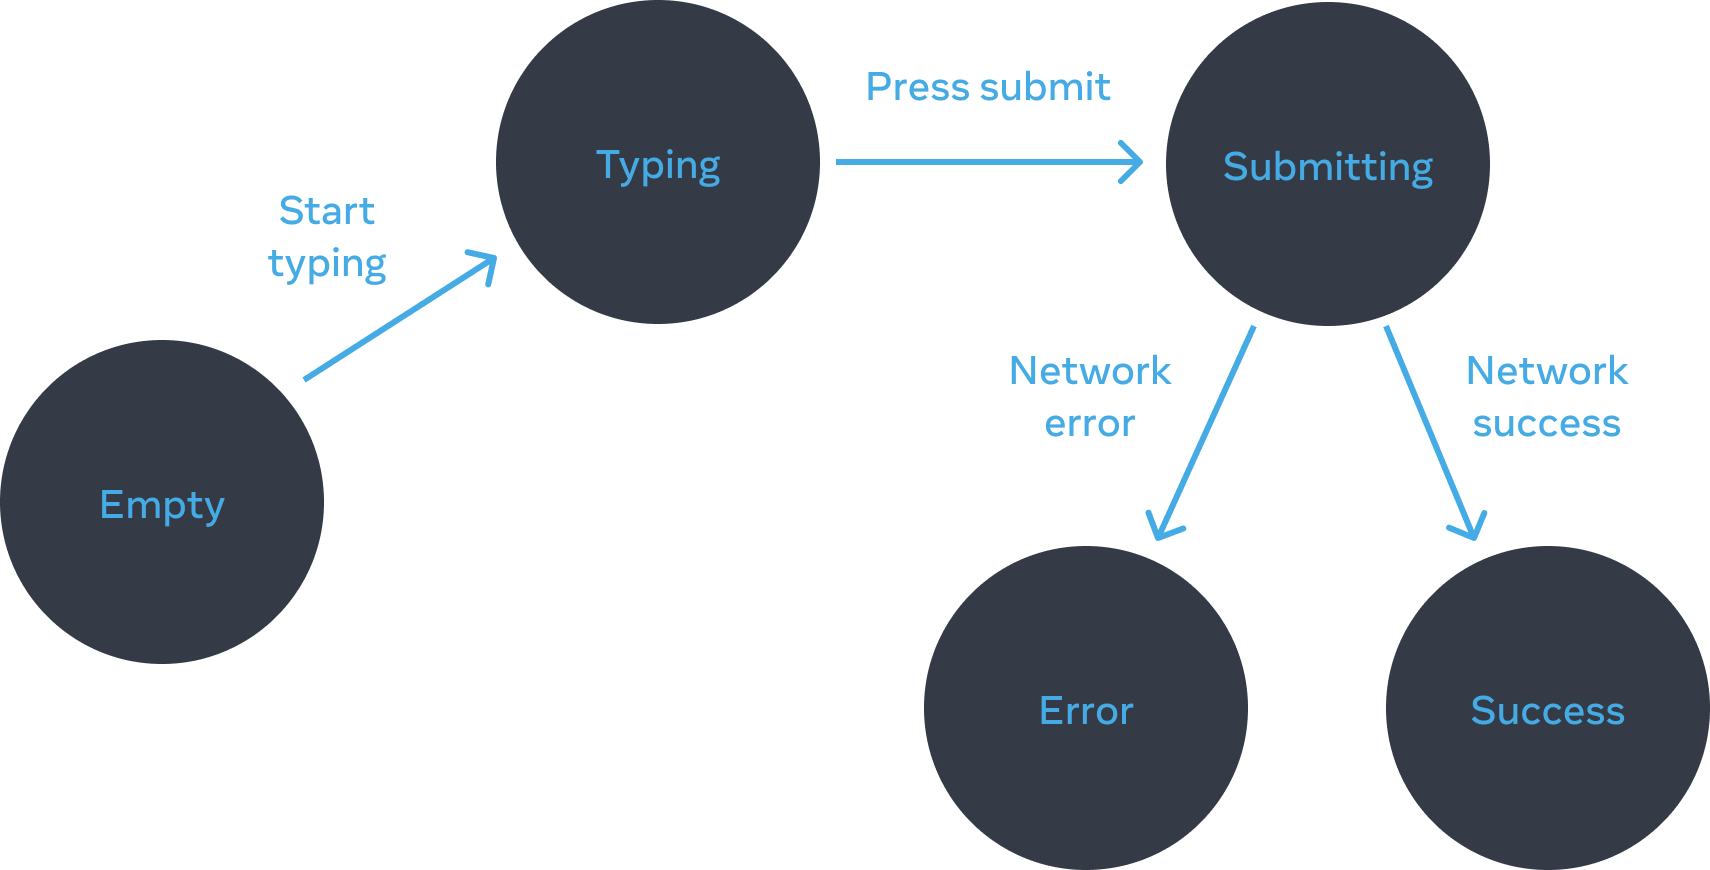 Flow chart moving left to right with 5 nodes. The first node labeled 'empty' has one edge labeled 'start typing' connected to a node labeled 'typing'. That node has one edge labeled 'press submit' connected to a node labeled 'submitting', which has two edges. The left edge is labeled 'network error' connecting to a node labeled 'error'. The right edge is labeled 'network success' connecting to a node labeled 'success'.